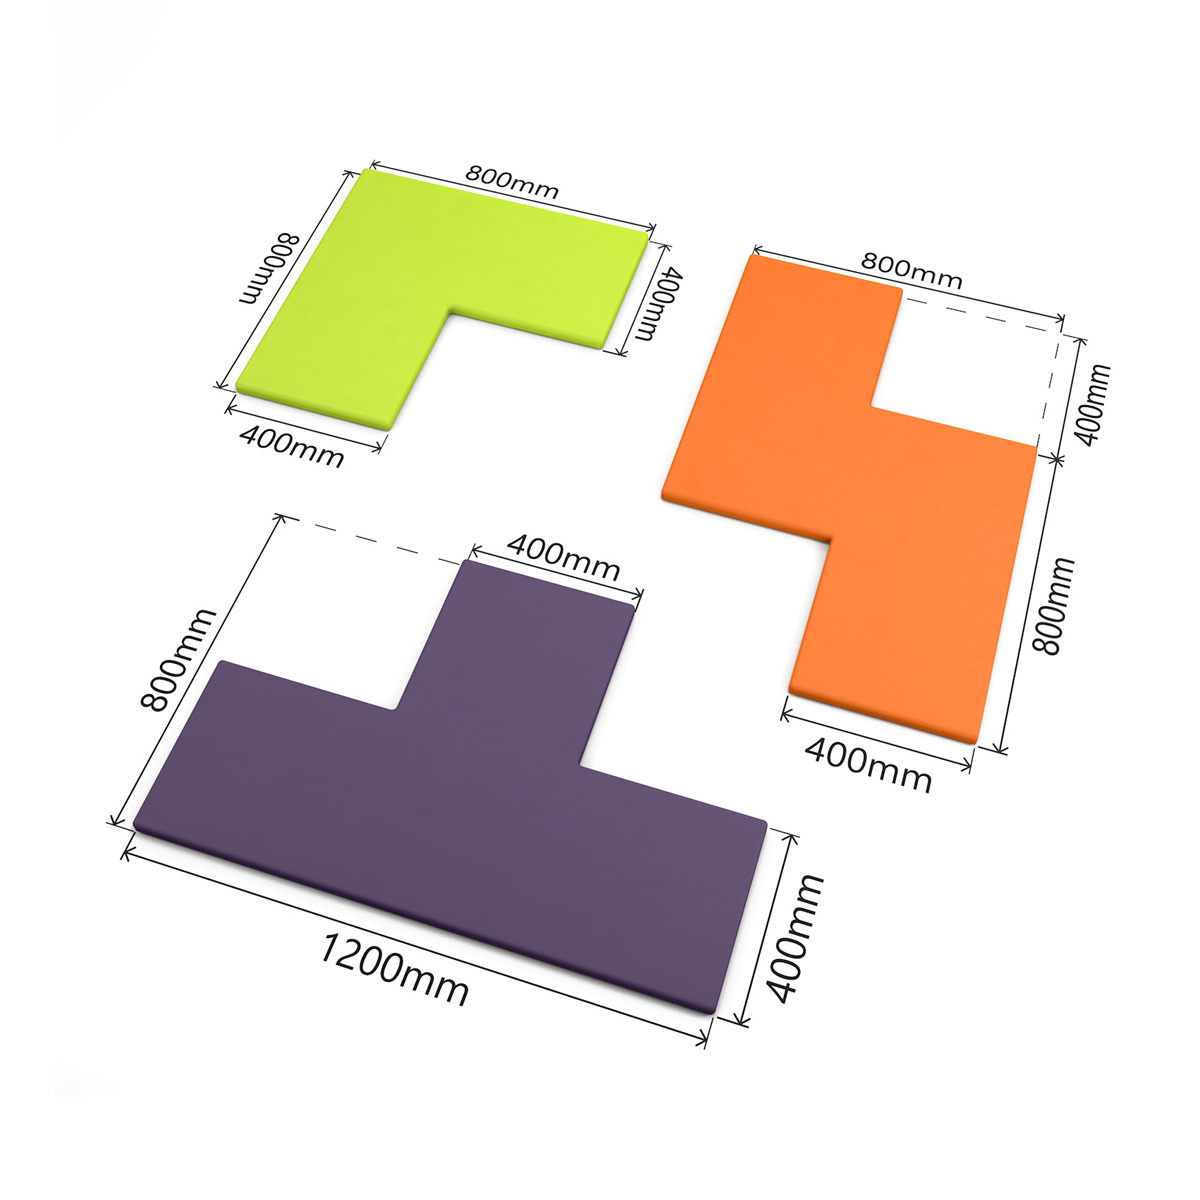 Dimensions of TETRATAK™ Modular Acoustic Soundproofing Wall Tile Panels 